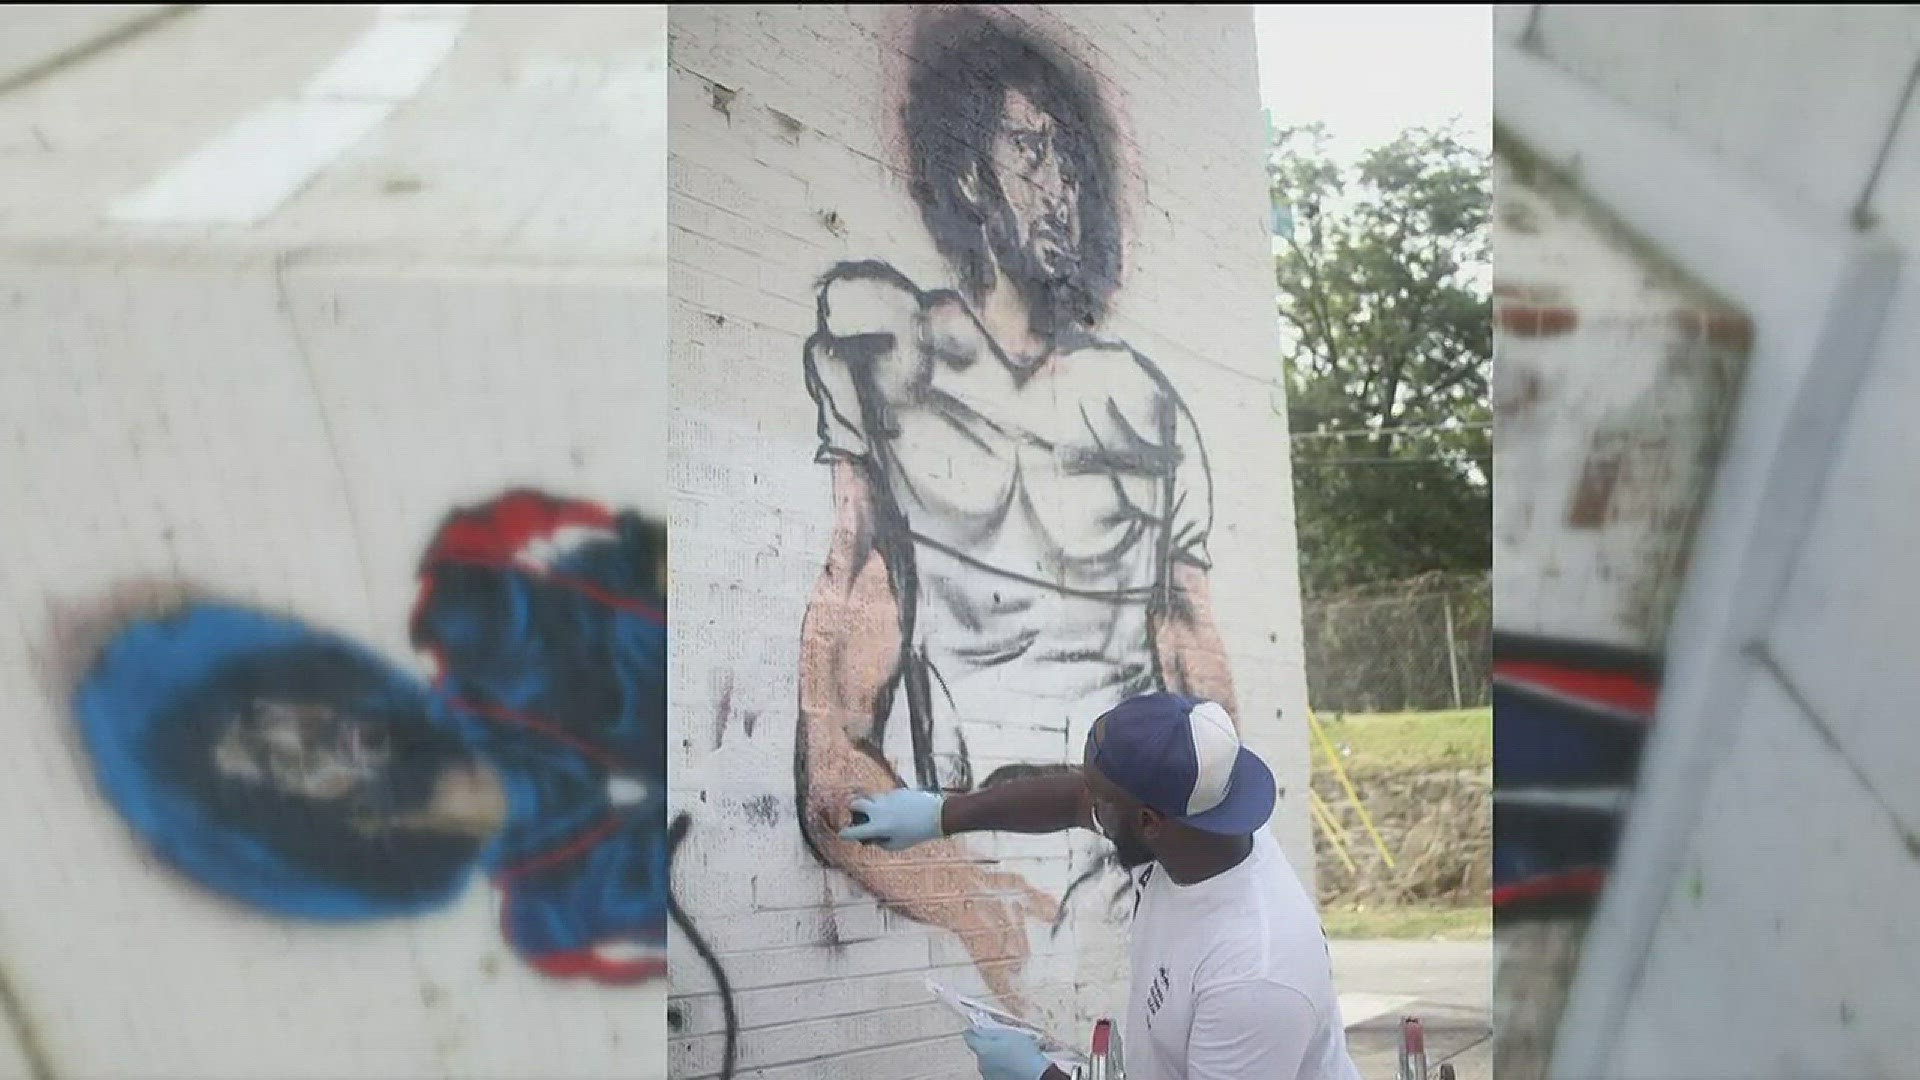 The mural strikes Kaepernick as a Falcon wearing No. 7, which was former Falcons quarterback Michael Vick's old number.